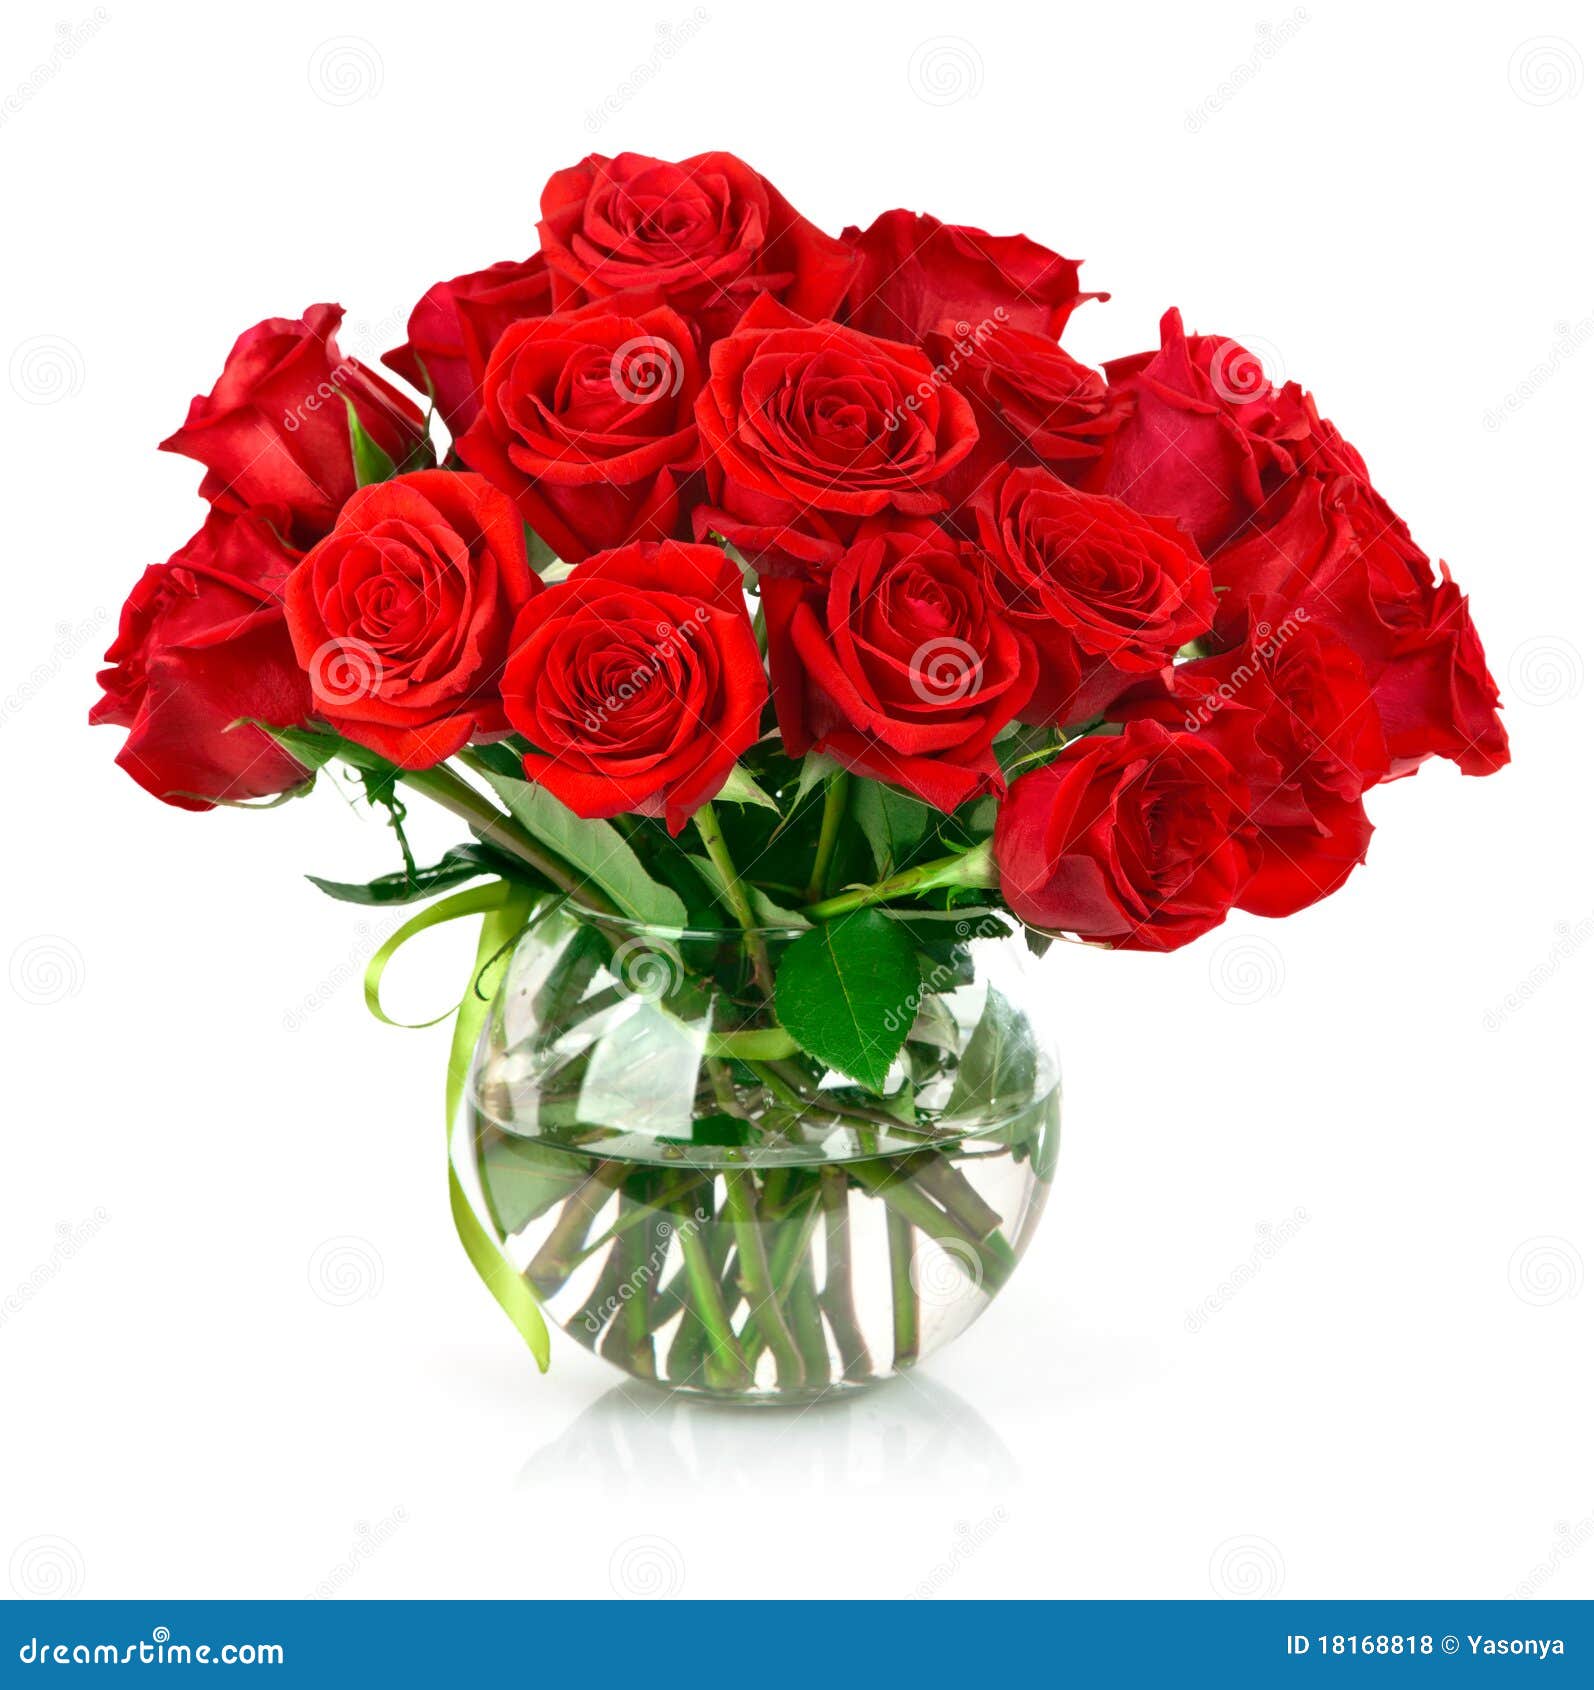 bouquet of roses clipart - photo #19